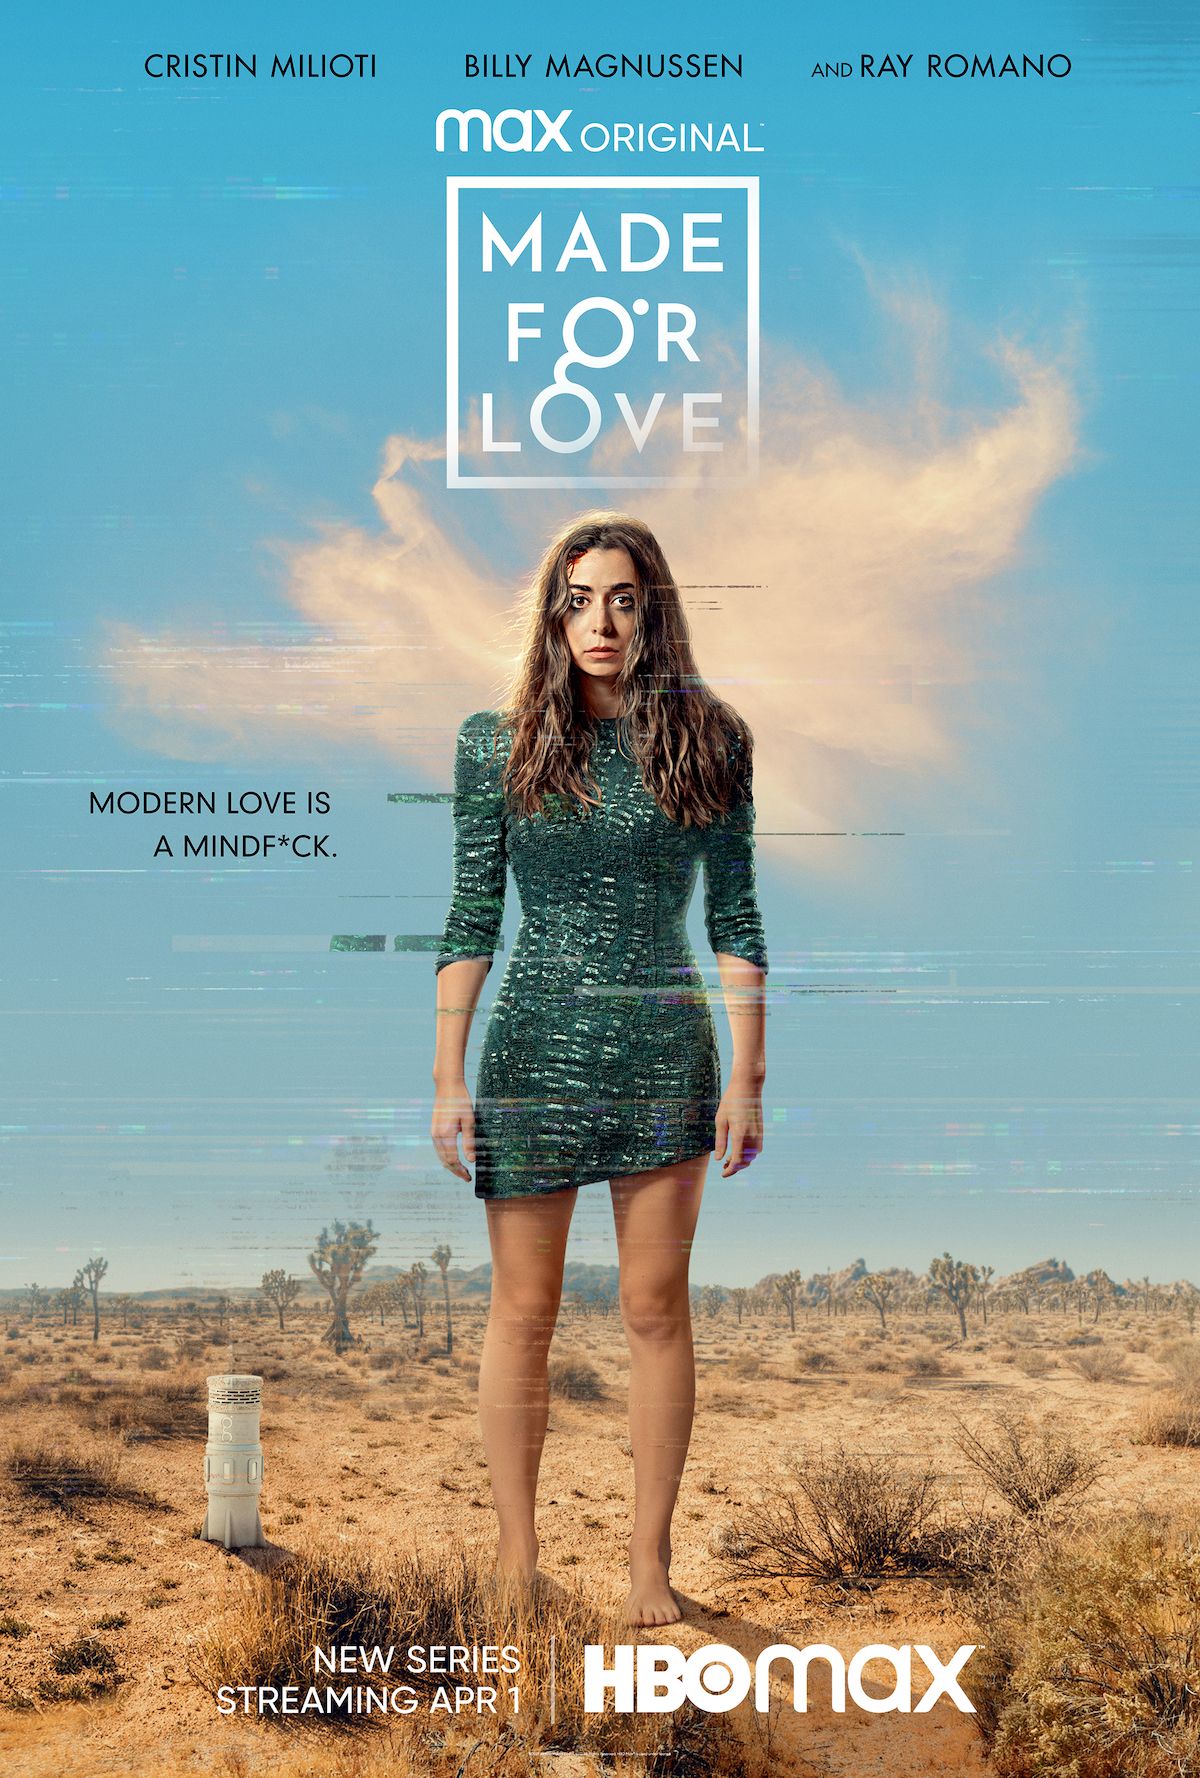 Made for Love HBO Max poster with Cristin Milioti